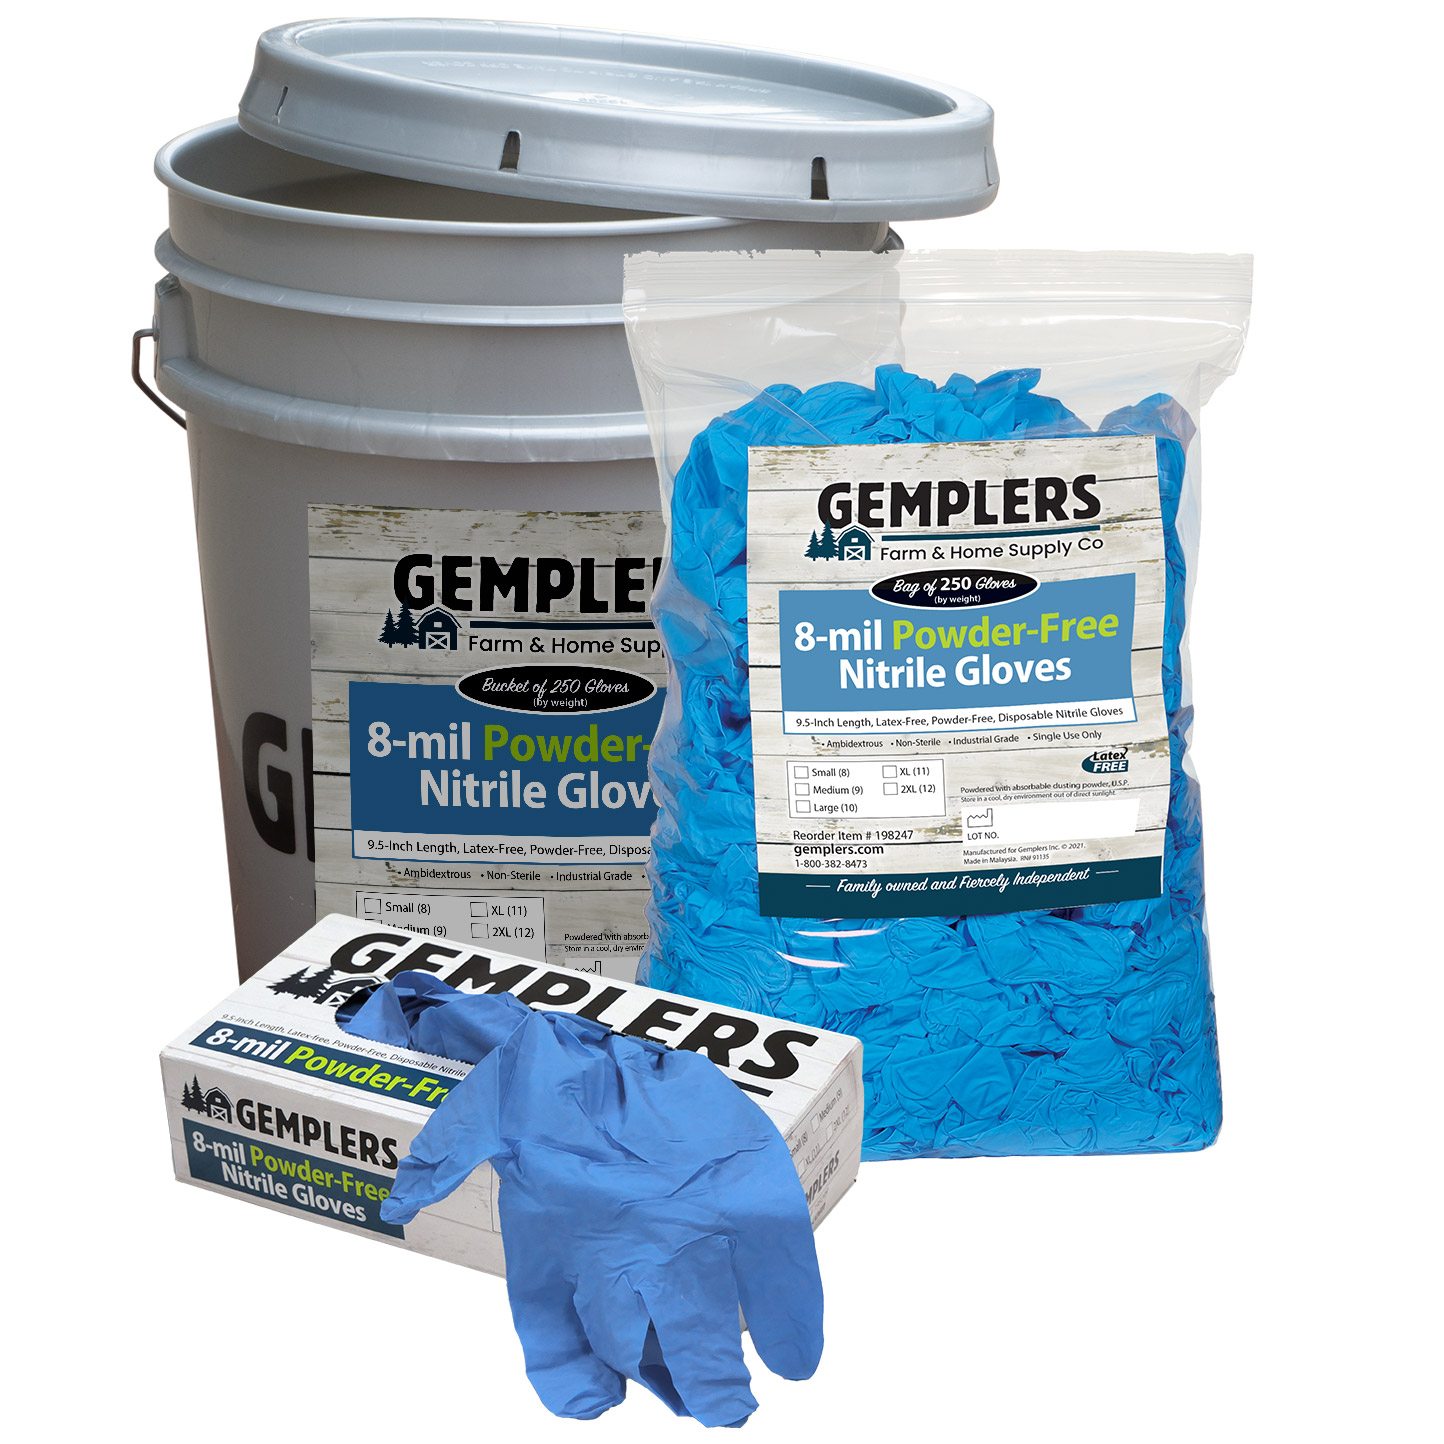 Gemplers Nitrile Glove 8-mil 50 count box, 250 count bag & bucket